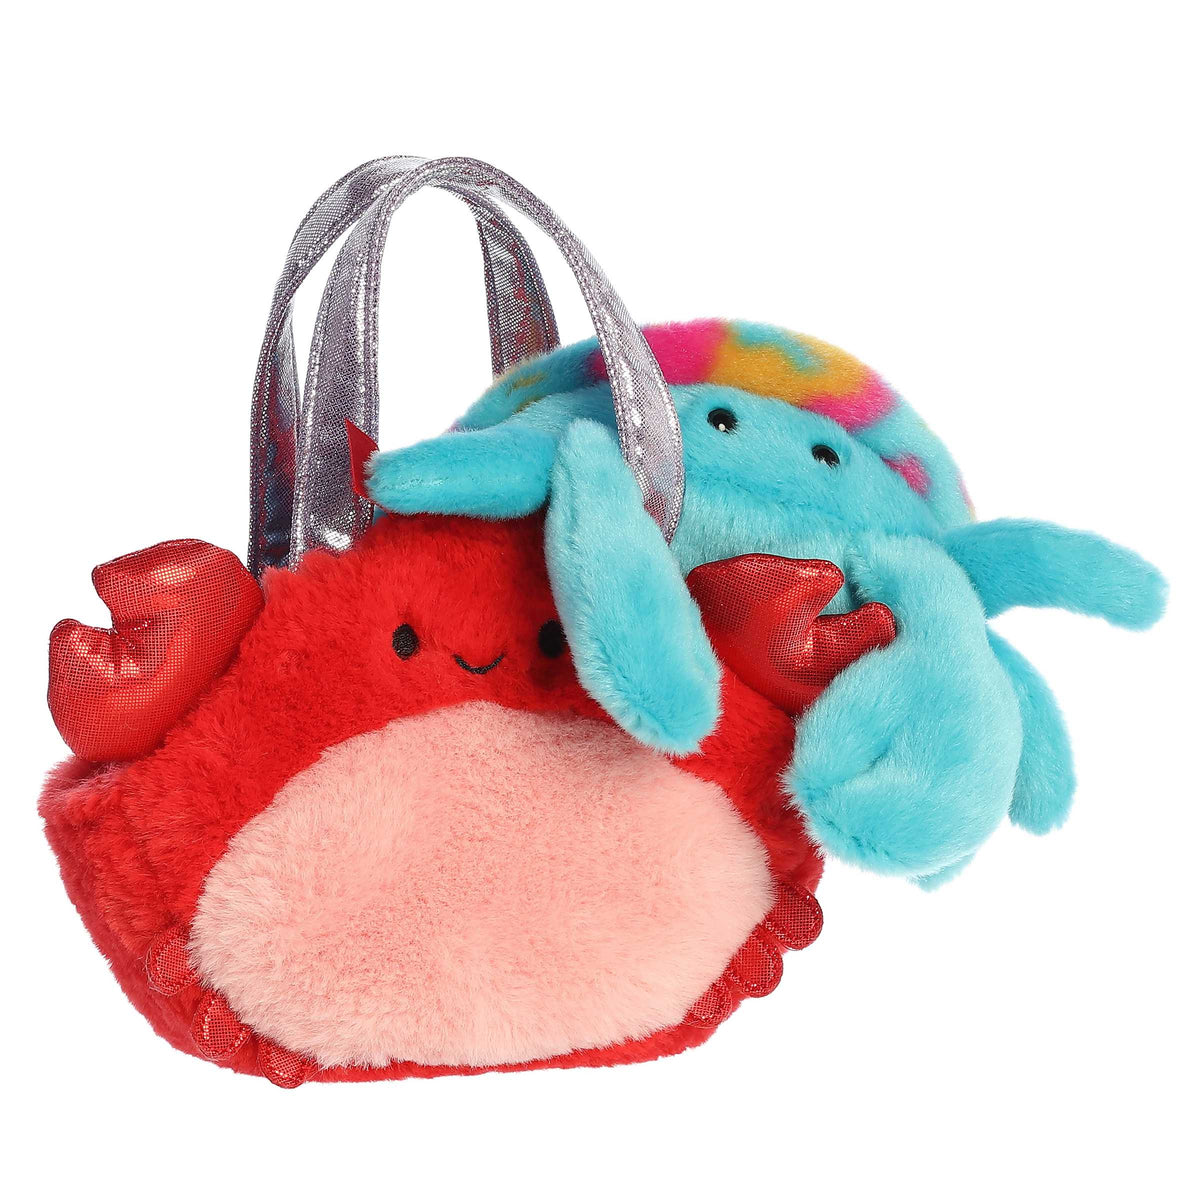 Soft blue Crab plush in a vibrant carrier, perfect for imaginative play or as a delightful gift.